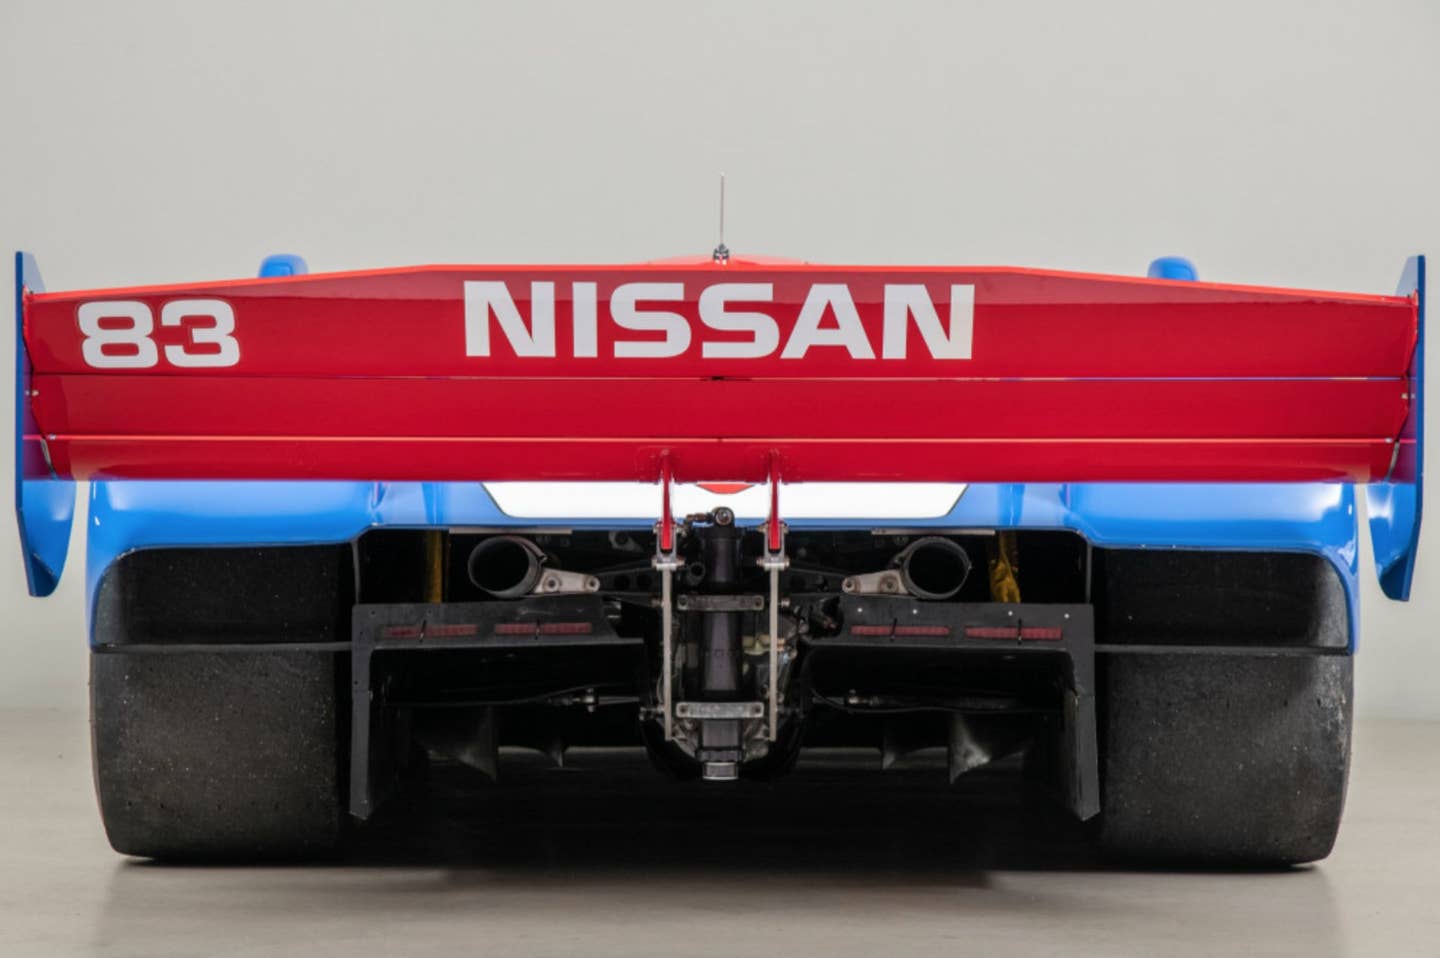 message-editor%2F1602037102184-nissan-1990-npt-90-close-up-tail-wing.jpg